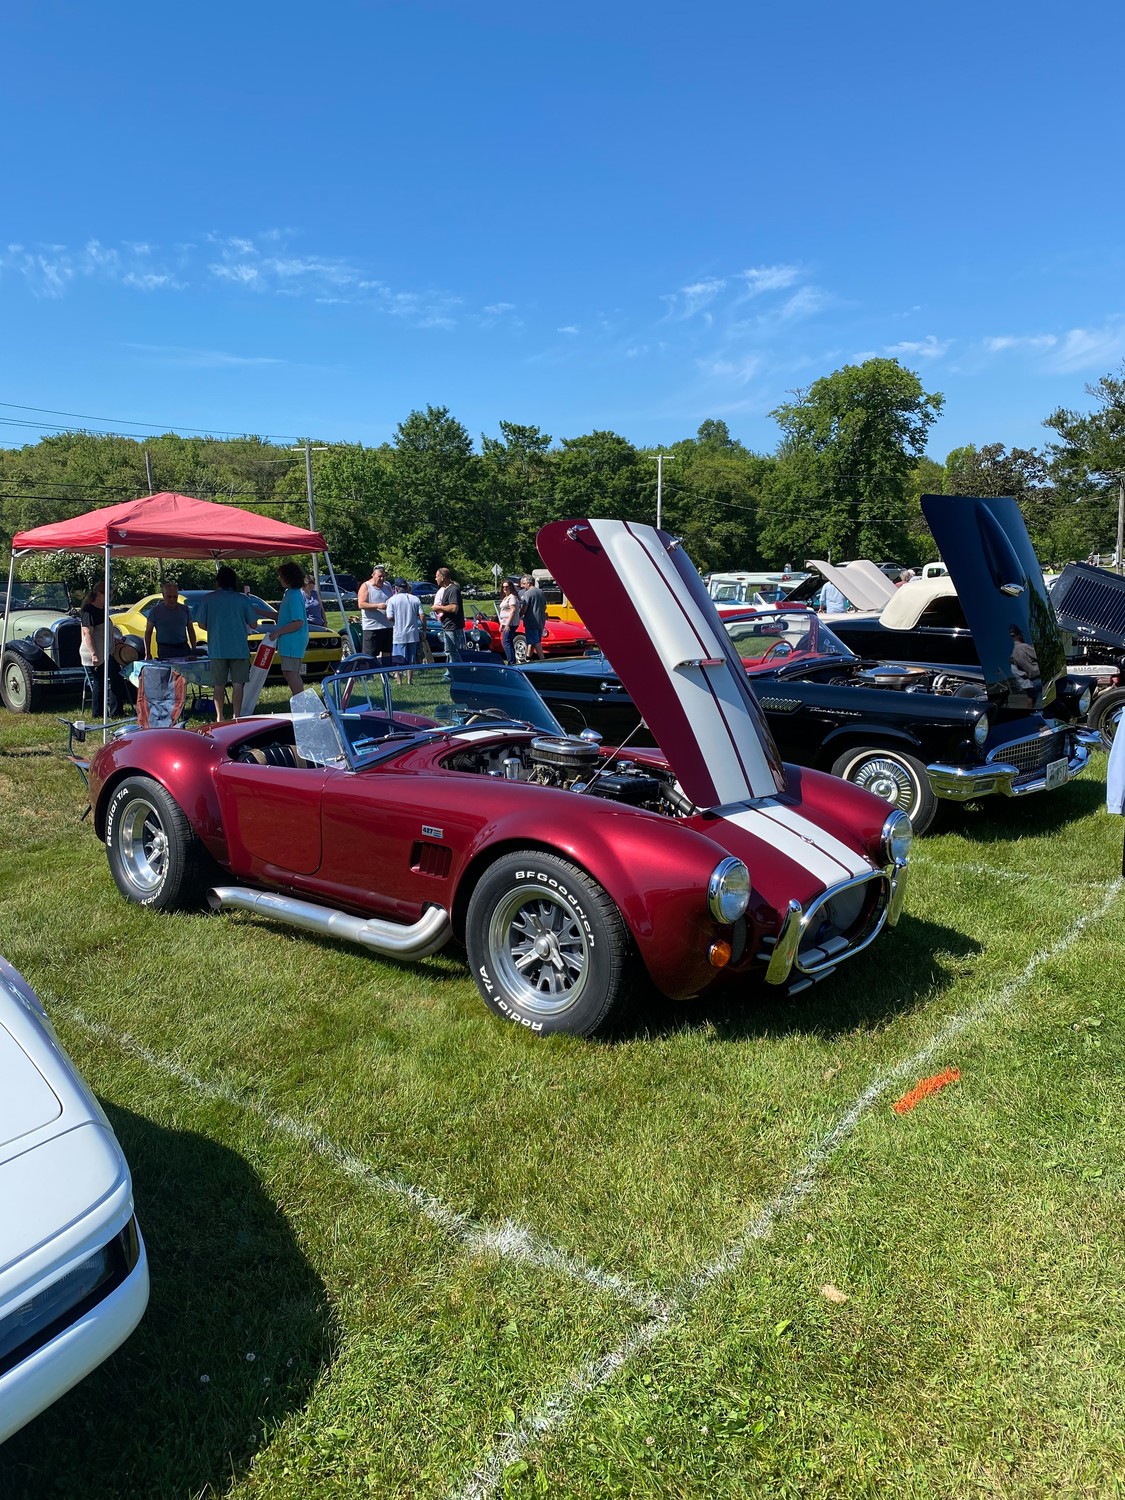 2nd Annual Antique Car Show News, Opinion, Things to